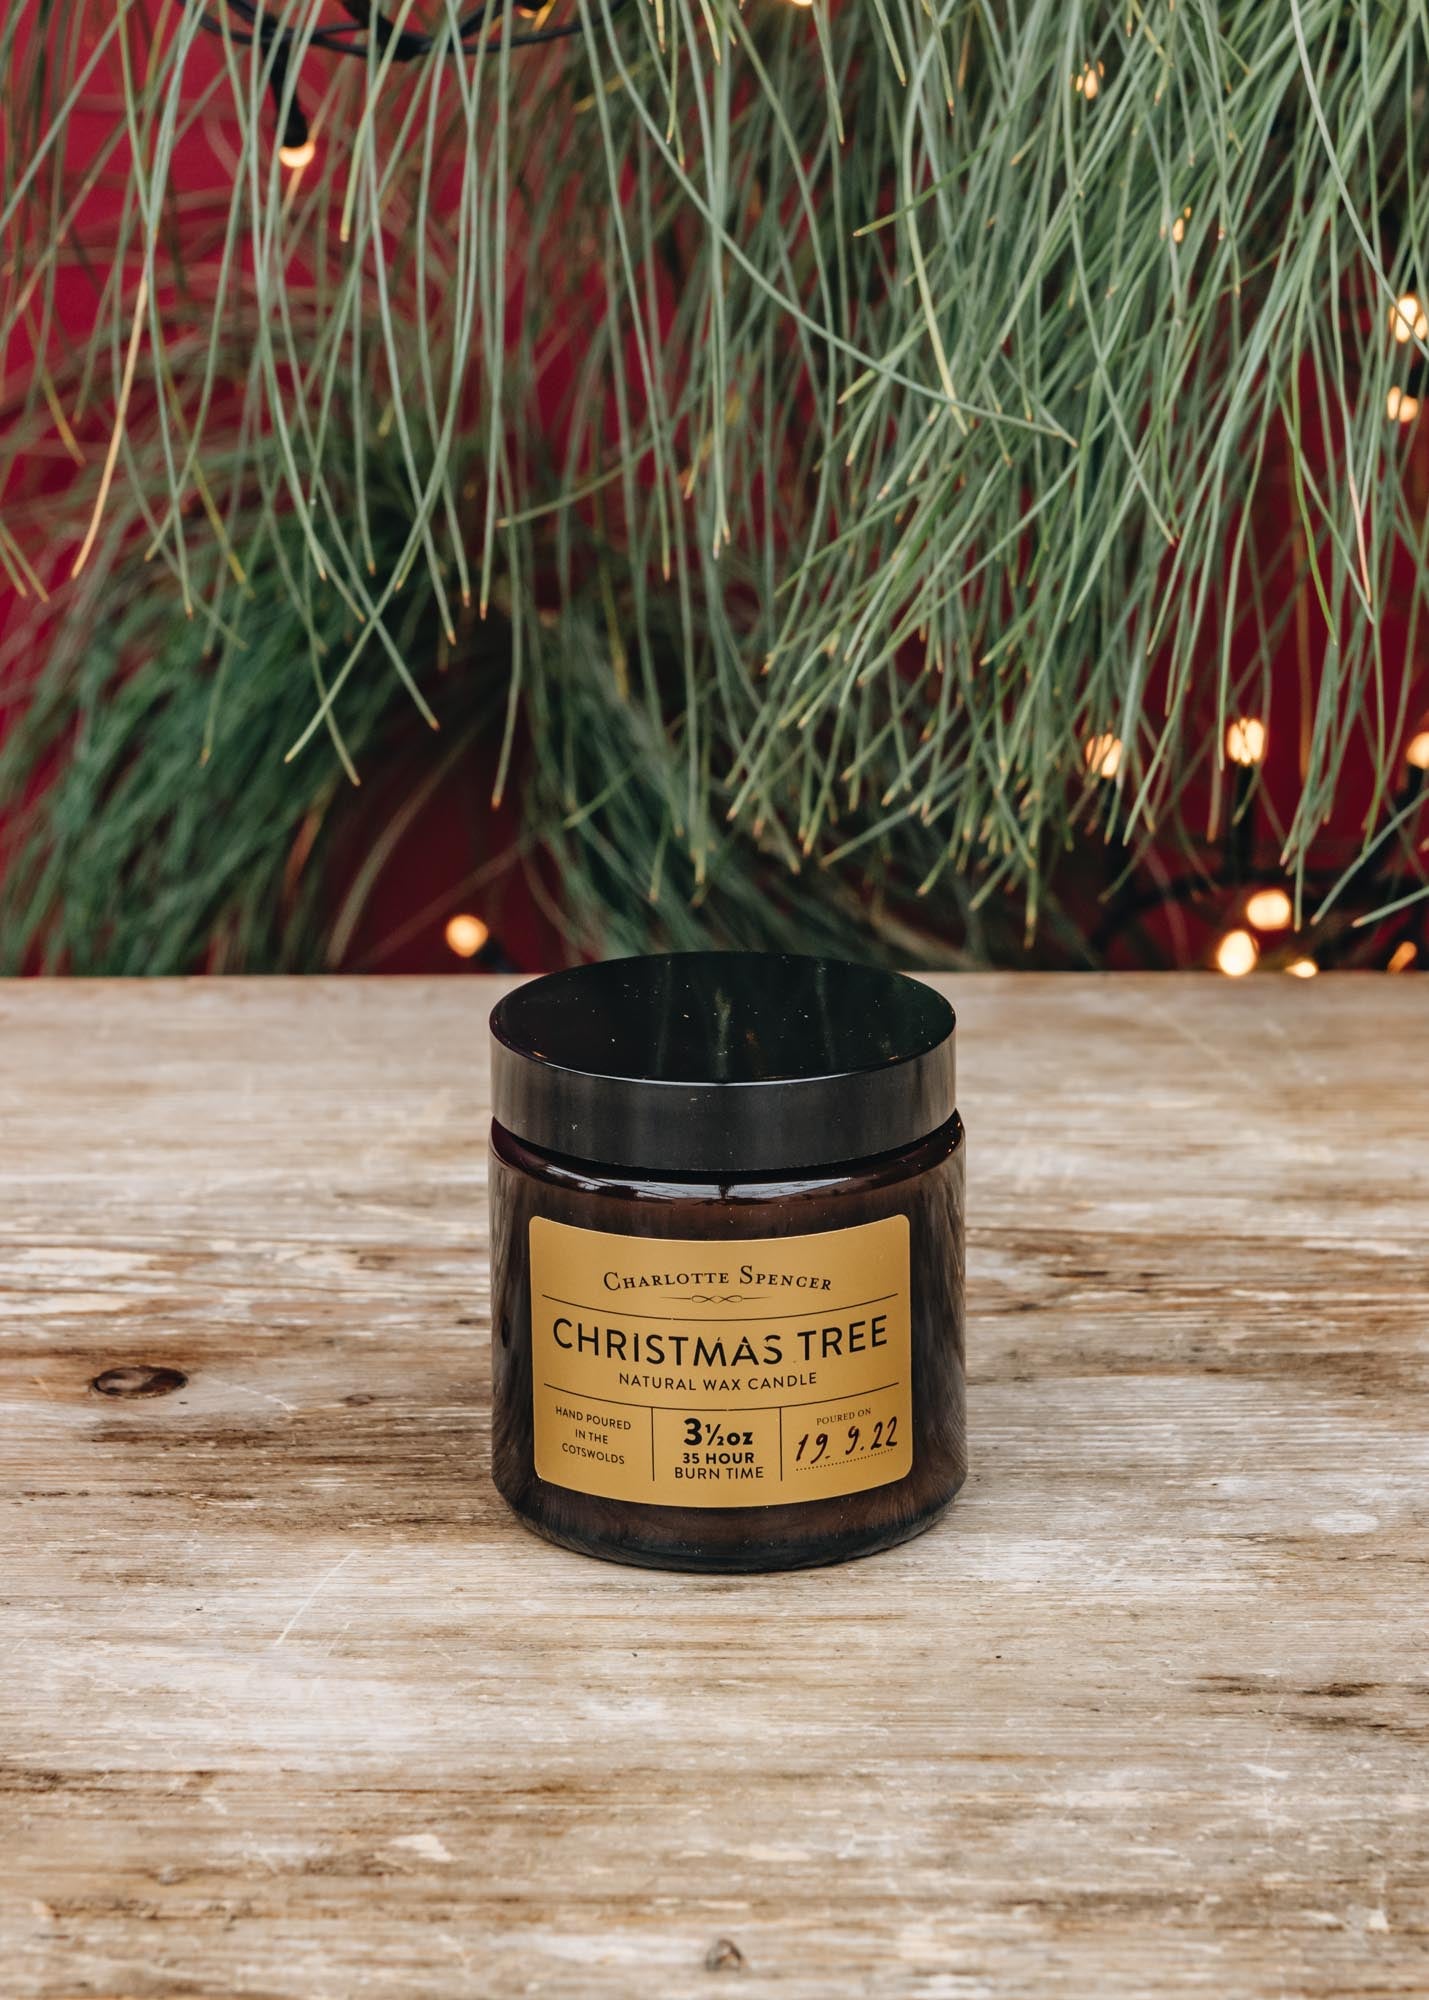 Charlotte Spencer Scented Candle in Christmas Tree, 3.5oz